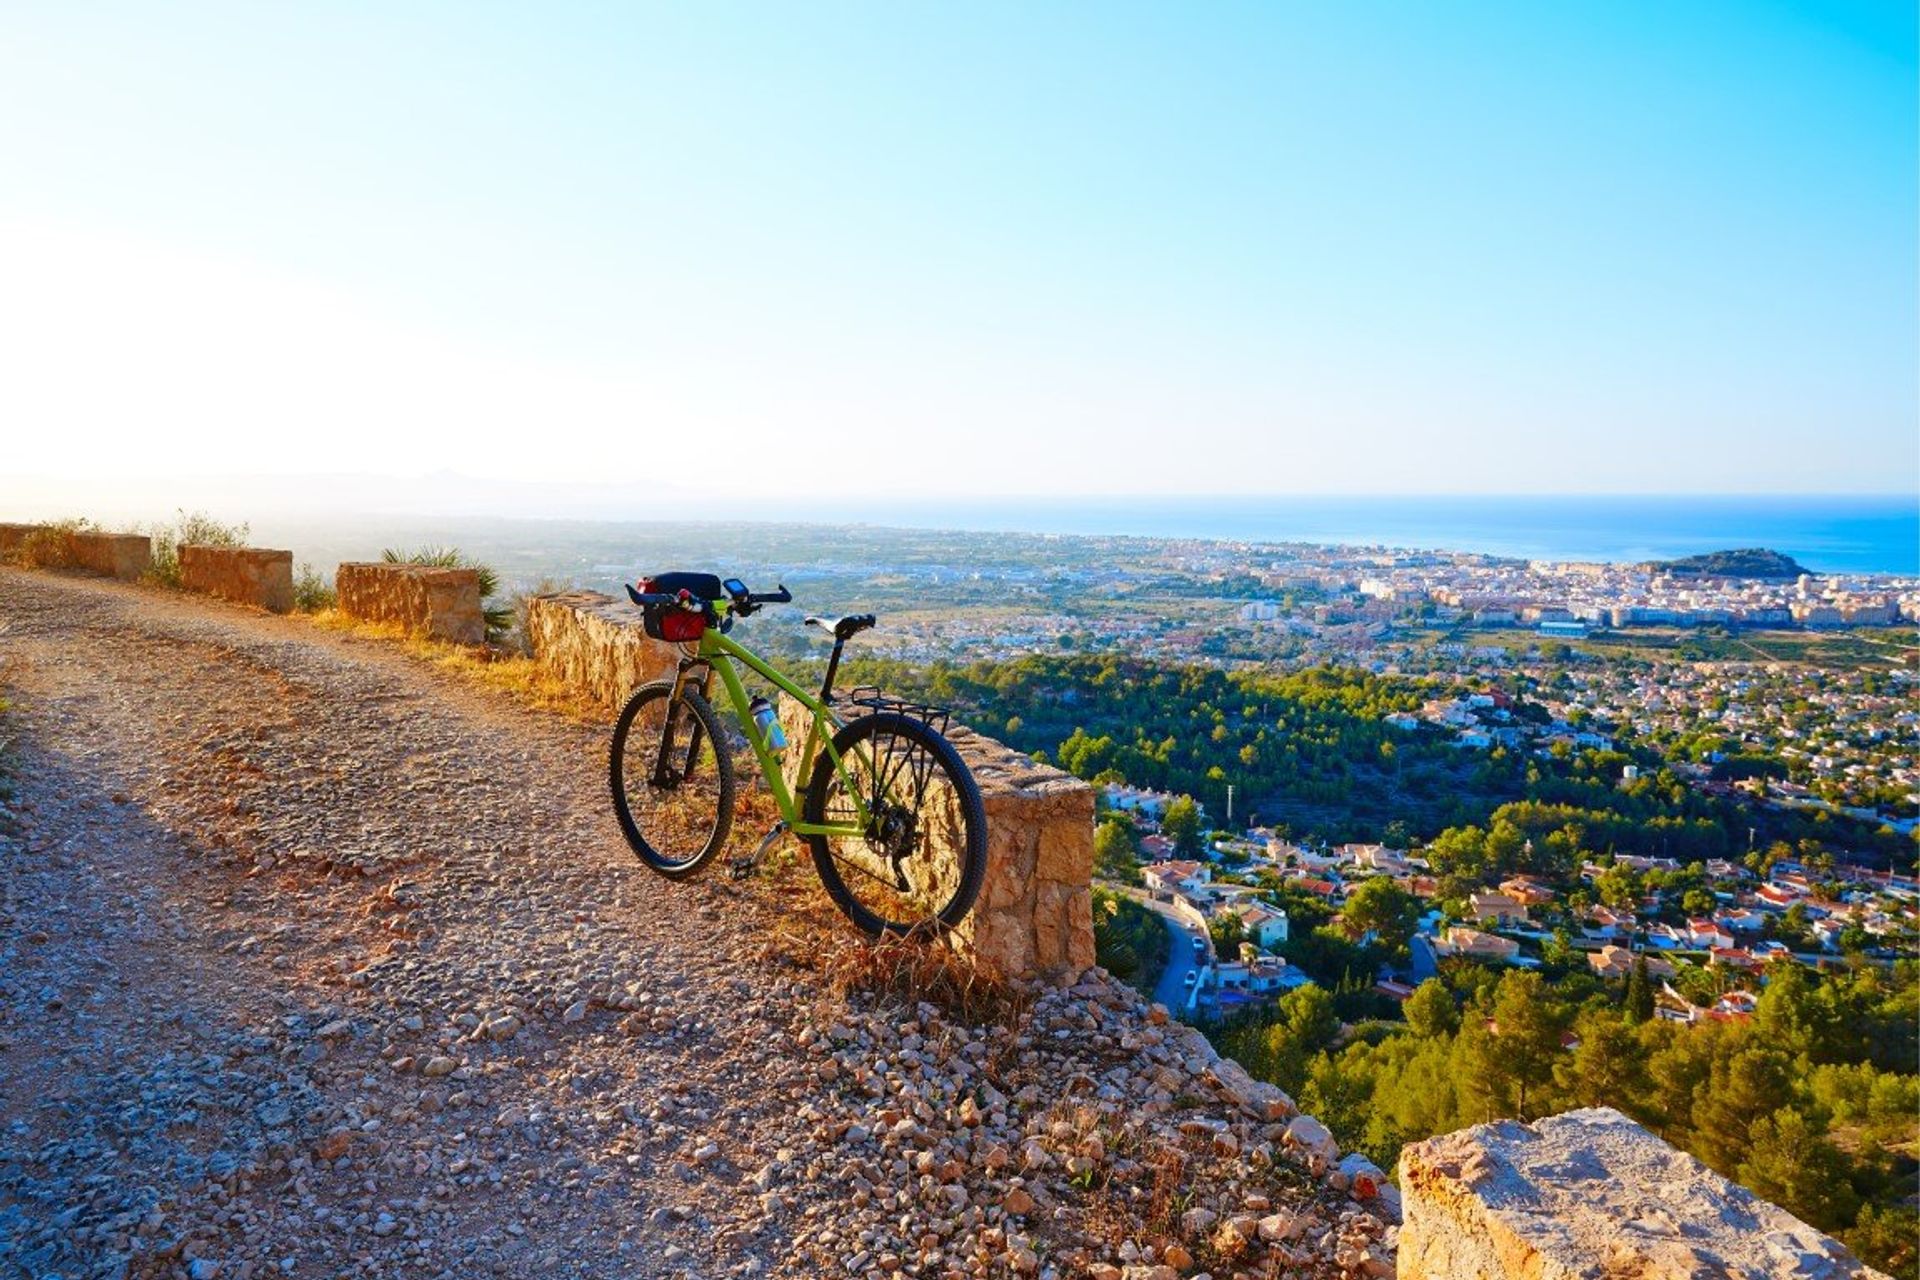 The surrounding landscape is a cyclist's dream, with plenty of scenic routes to Montgo Natural Park